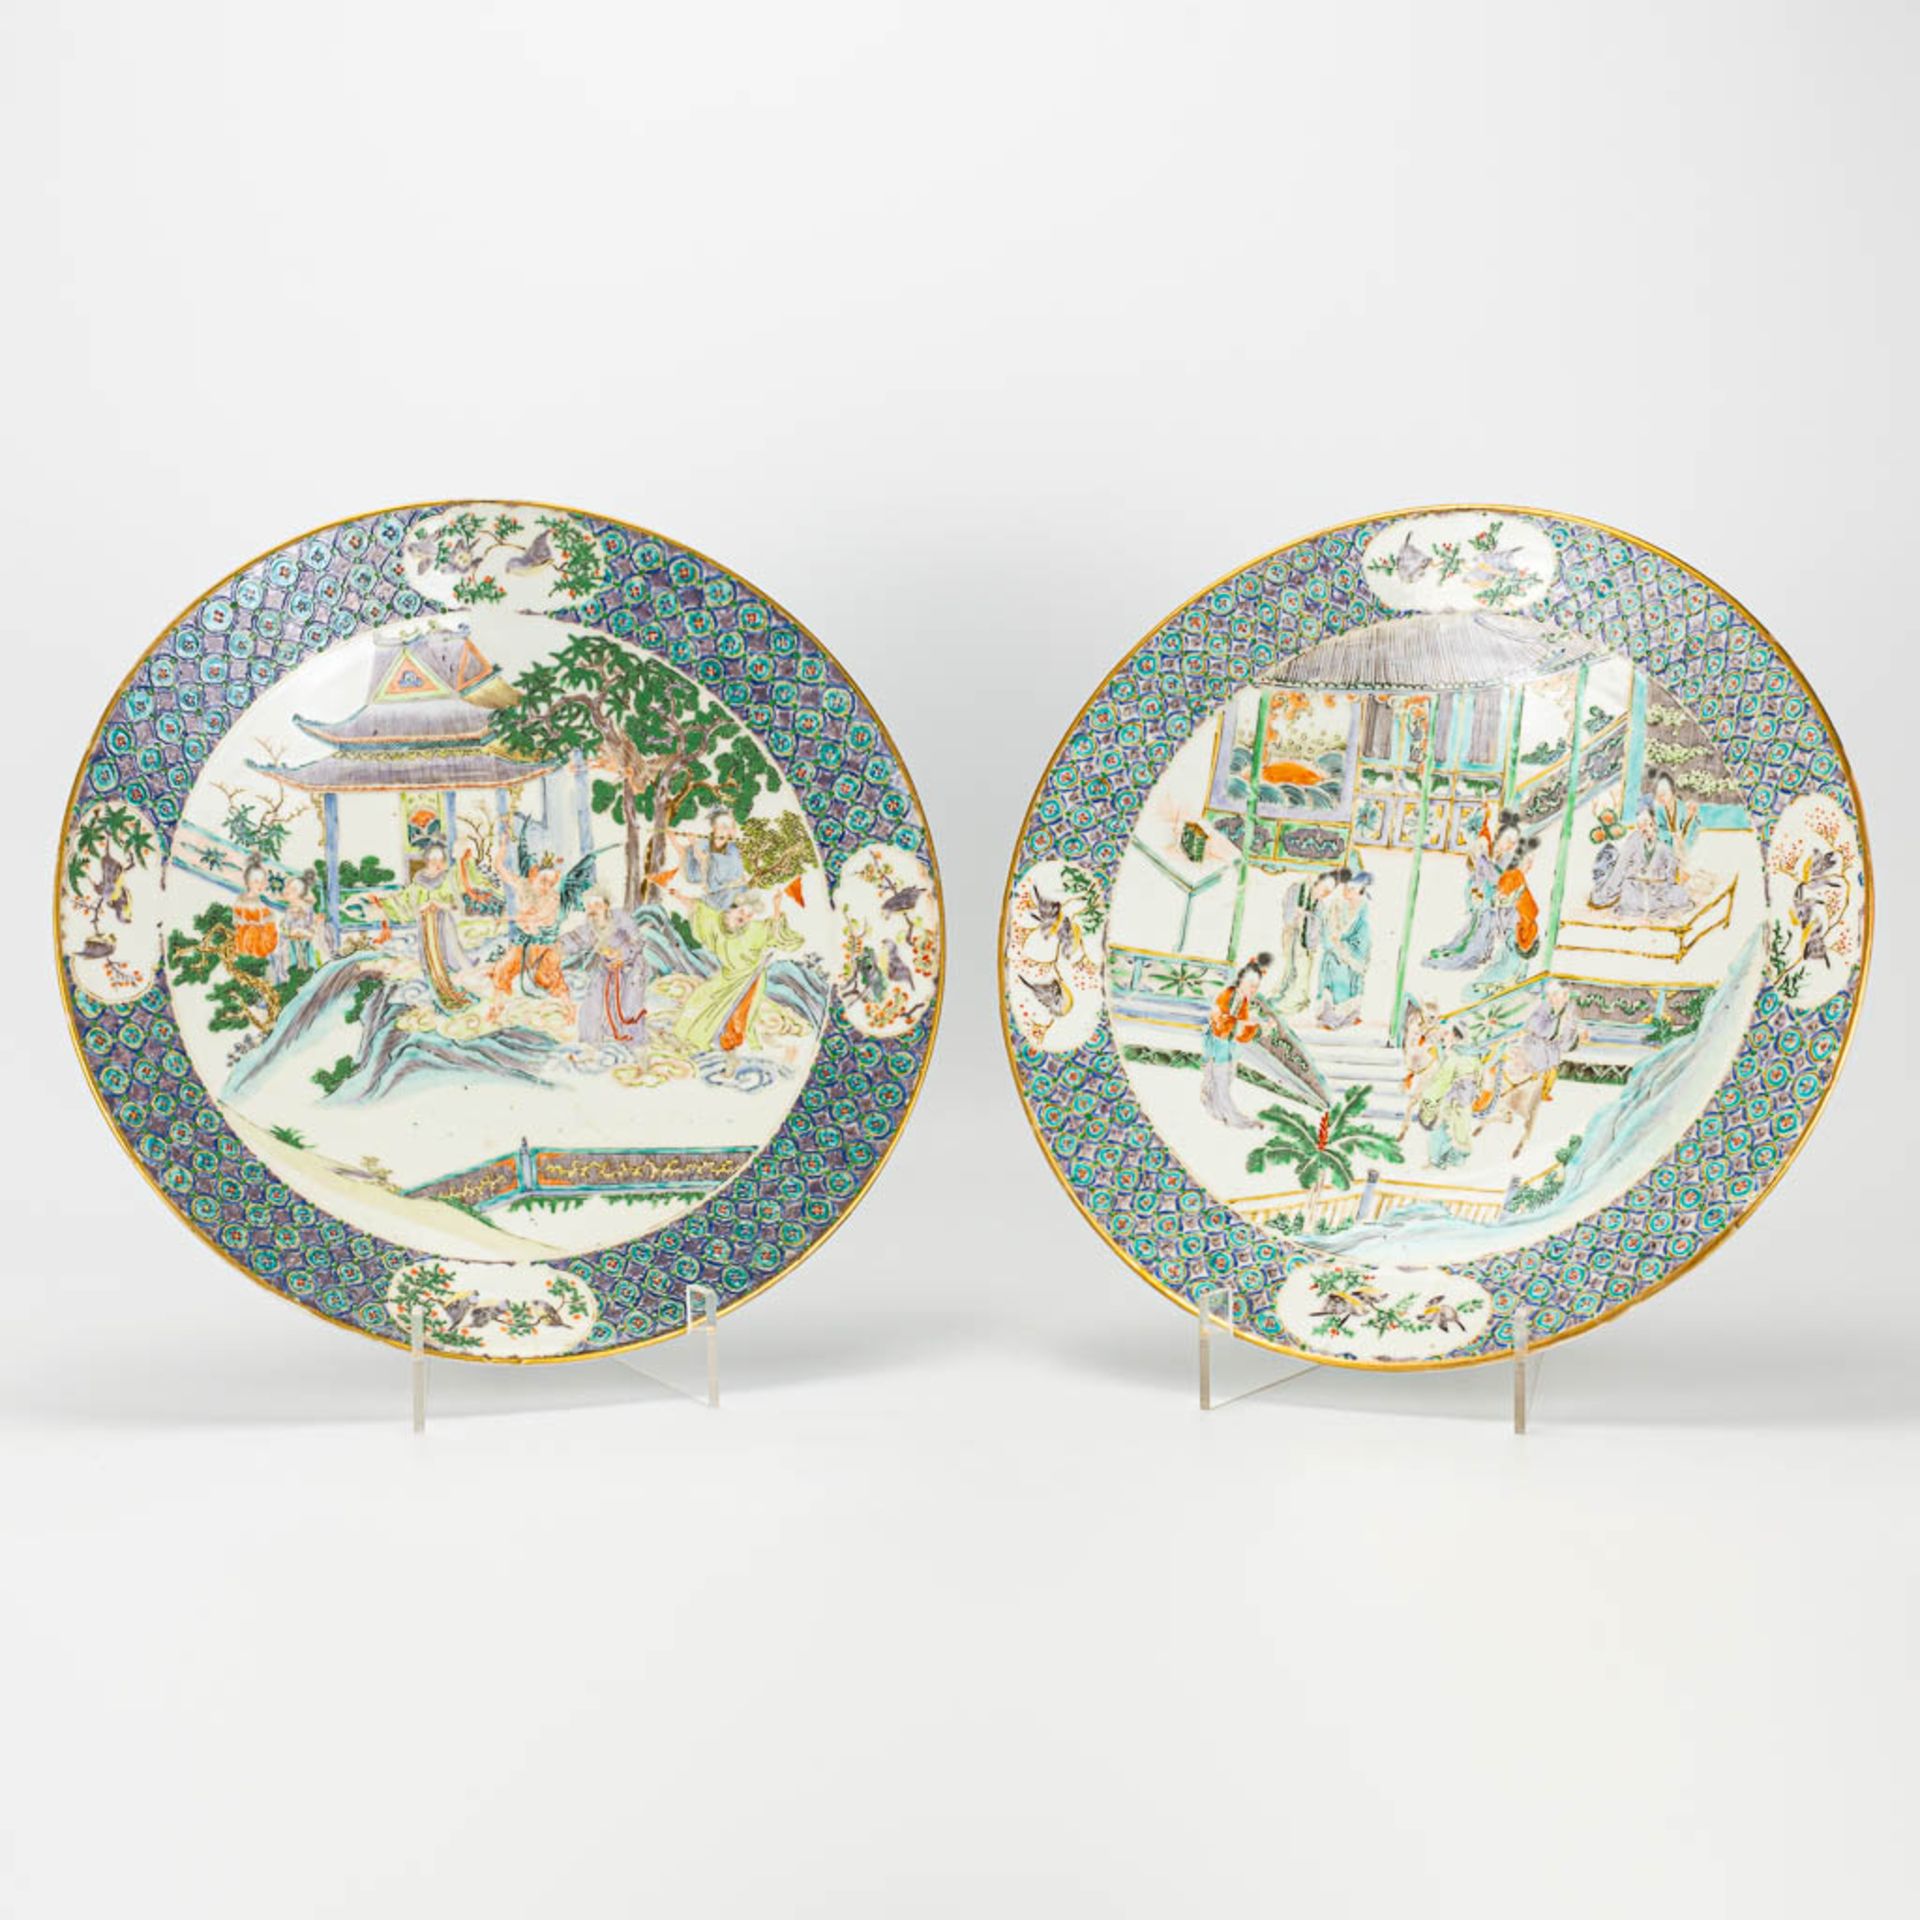 A pair of plates made of Chinese porcelain in Kanton style. 19th century.